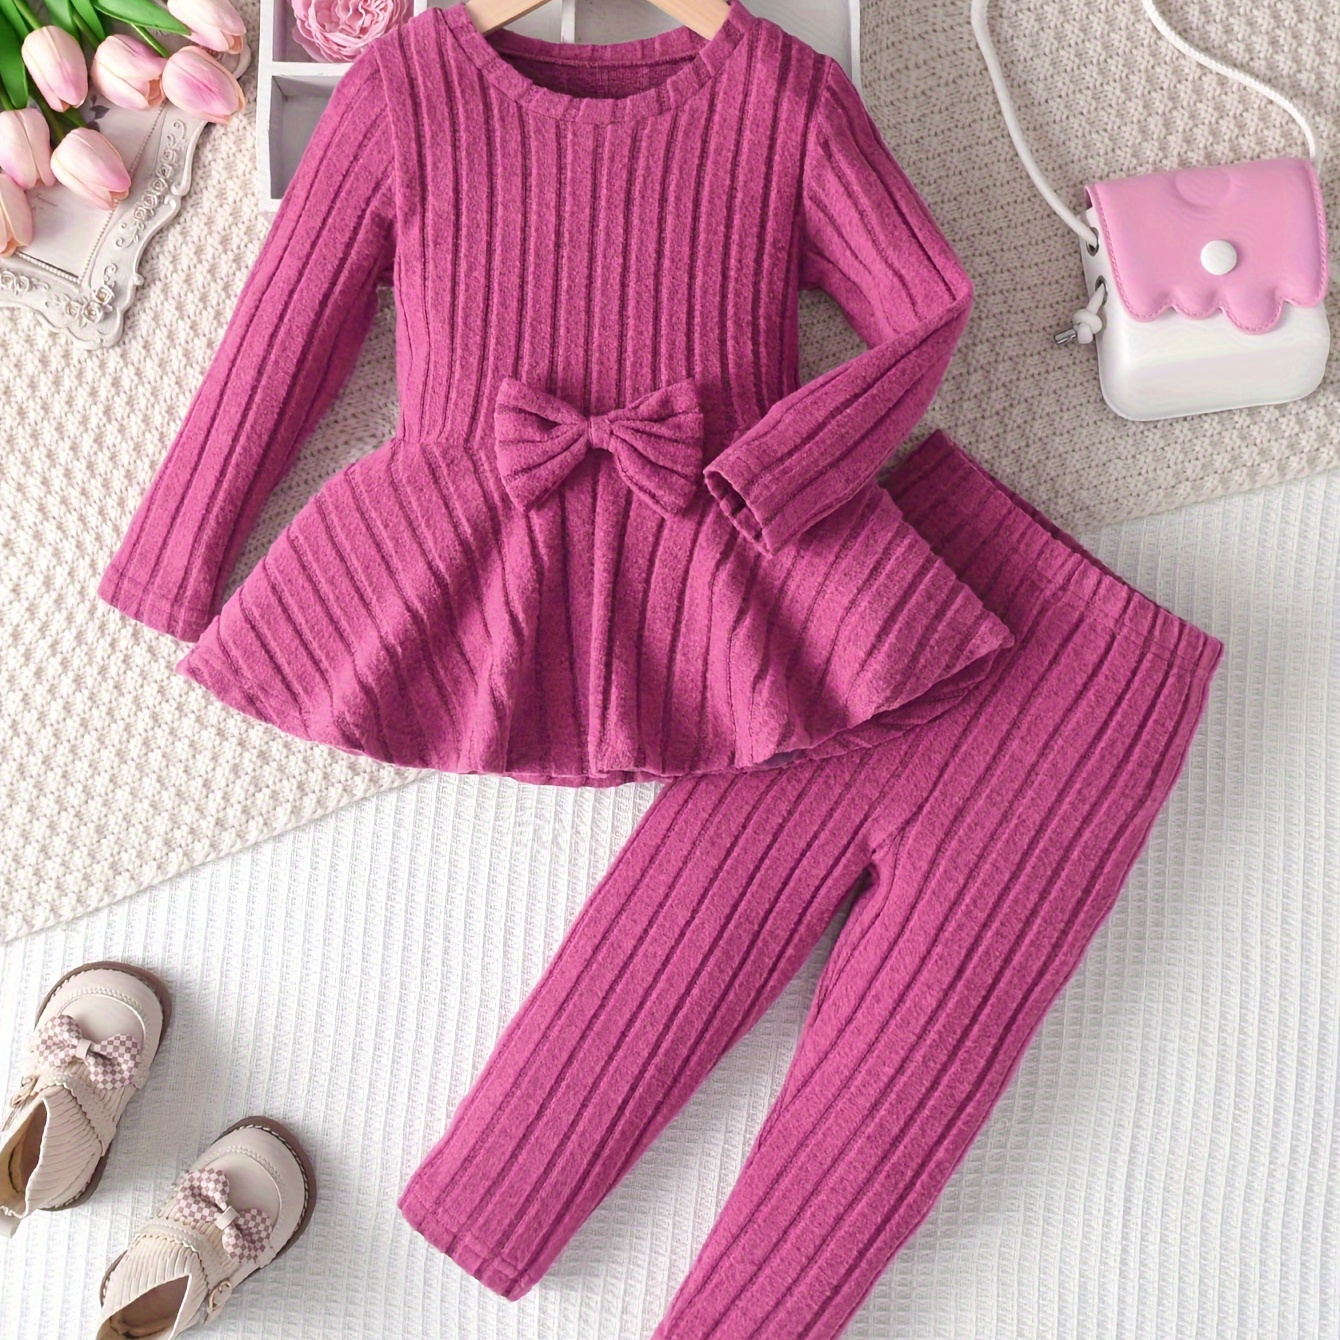 

2pcs Girl's Outfit Bow Long Sleeve Peplum Top + Leggings Rib-knit Co-ords Set, Comfy Casual Girls Spring/fall Clothes